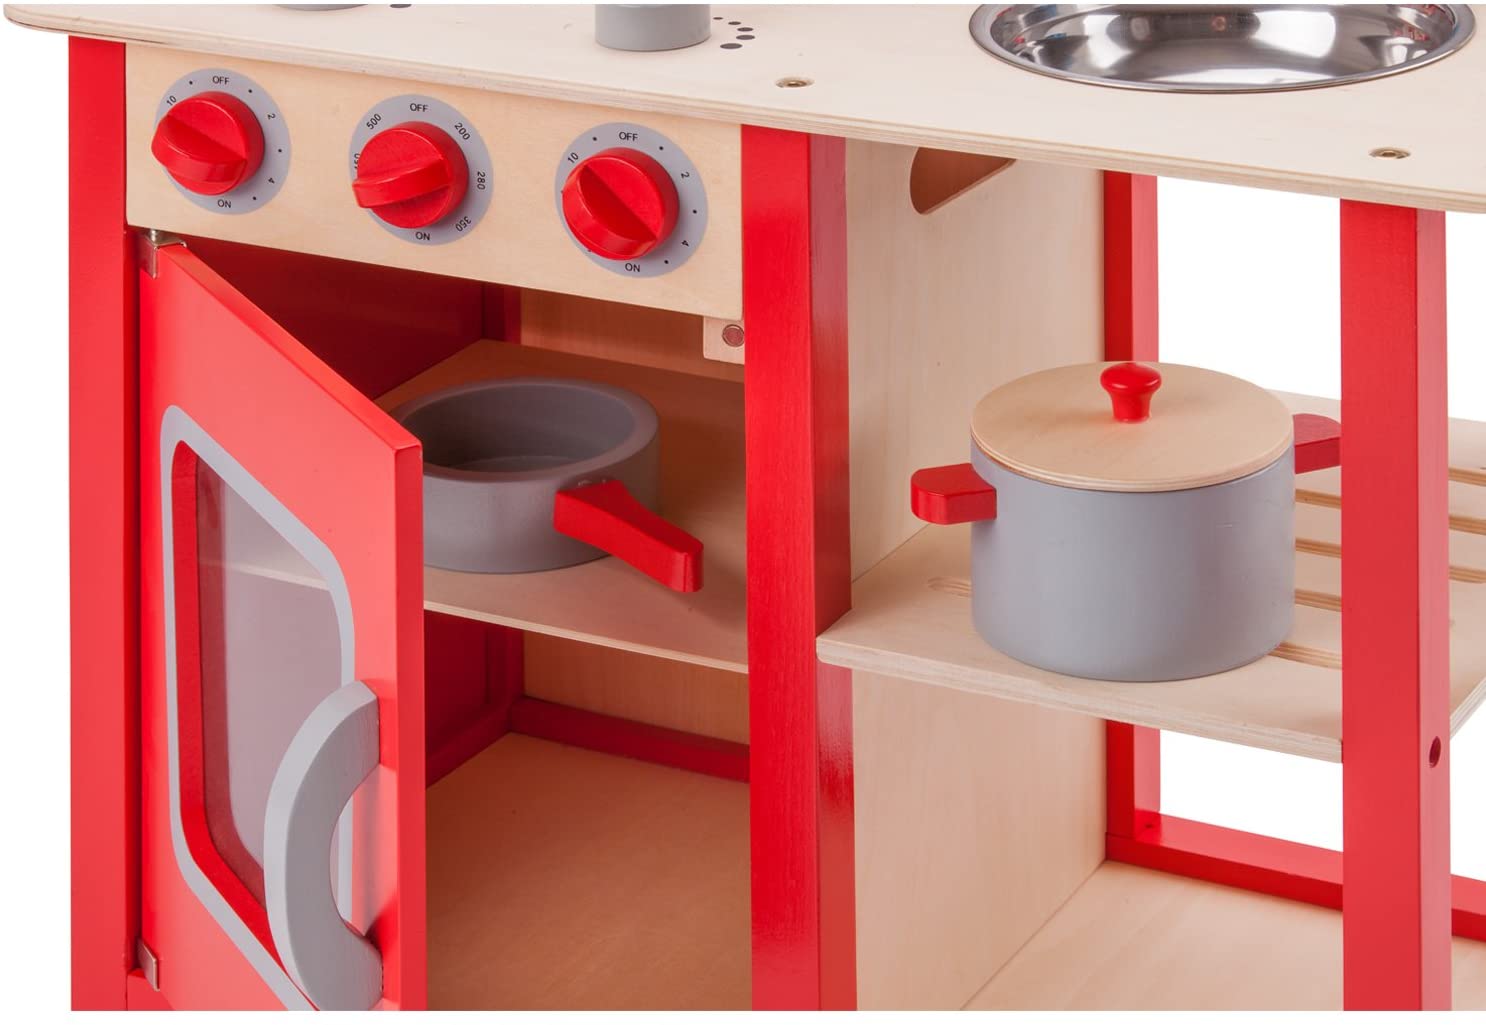 Red Wooden Pretend Play Toy Kitchen for Kids with Role Play Bon Appetit Included Accesoires